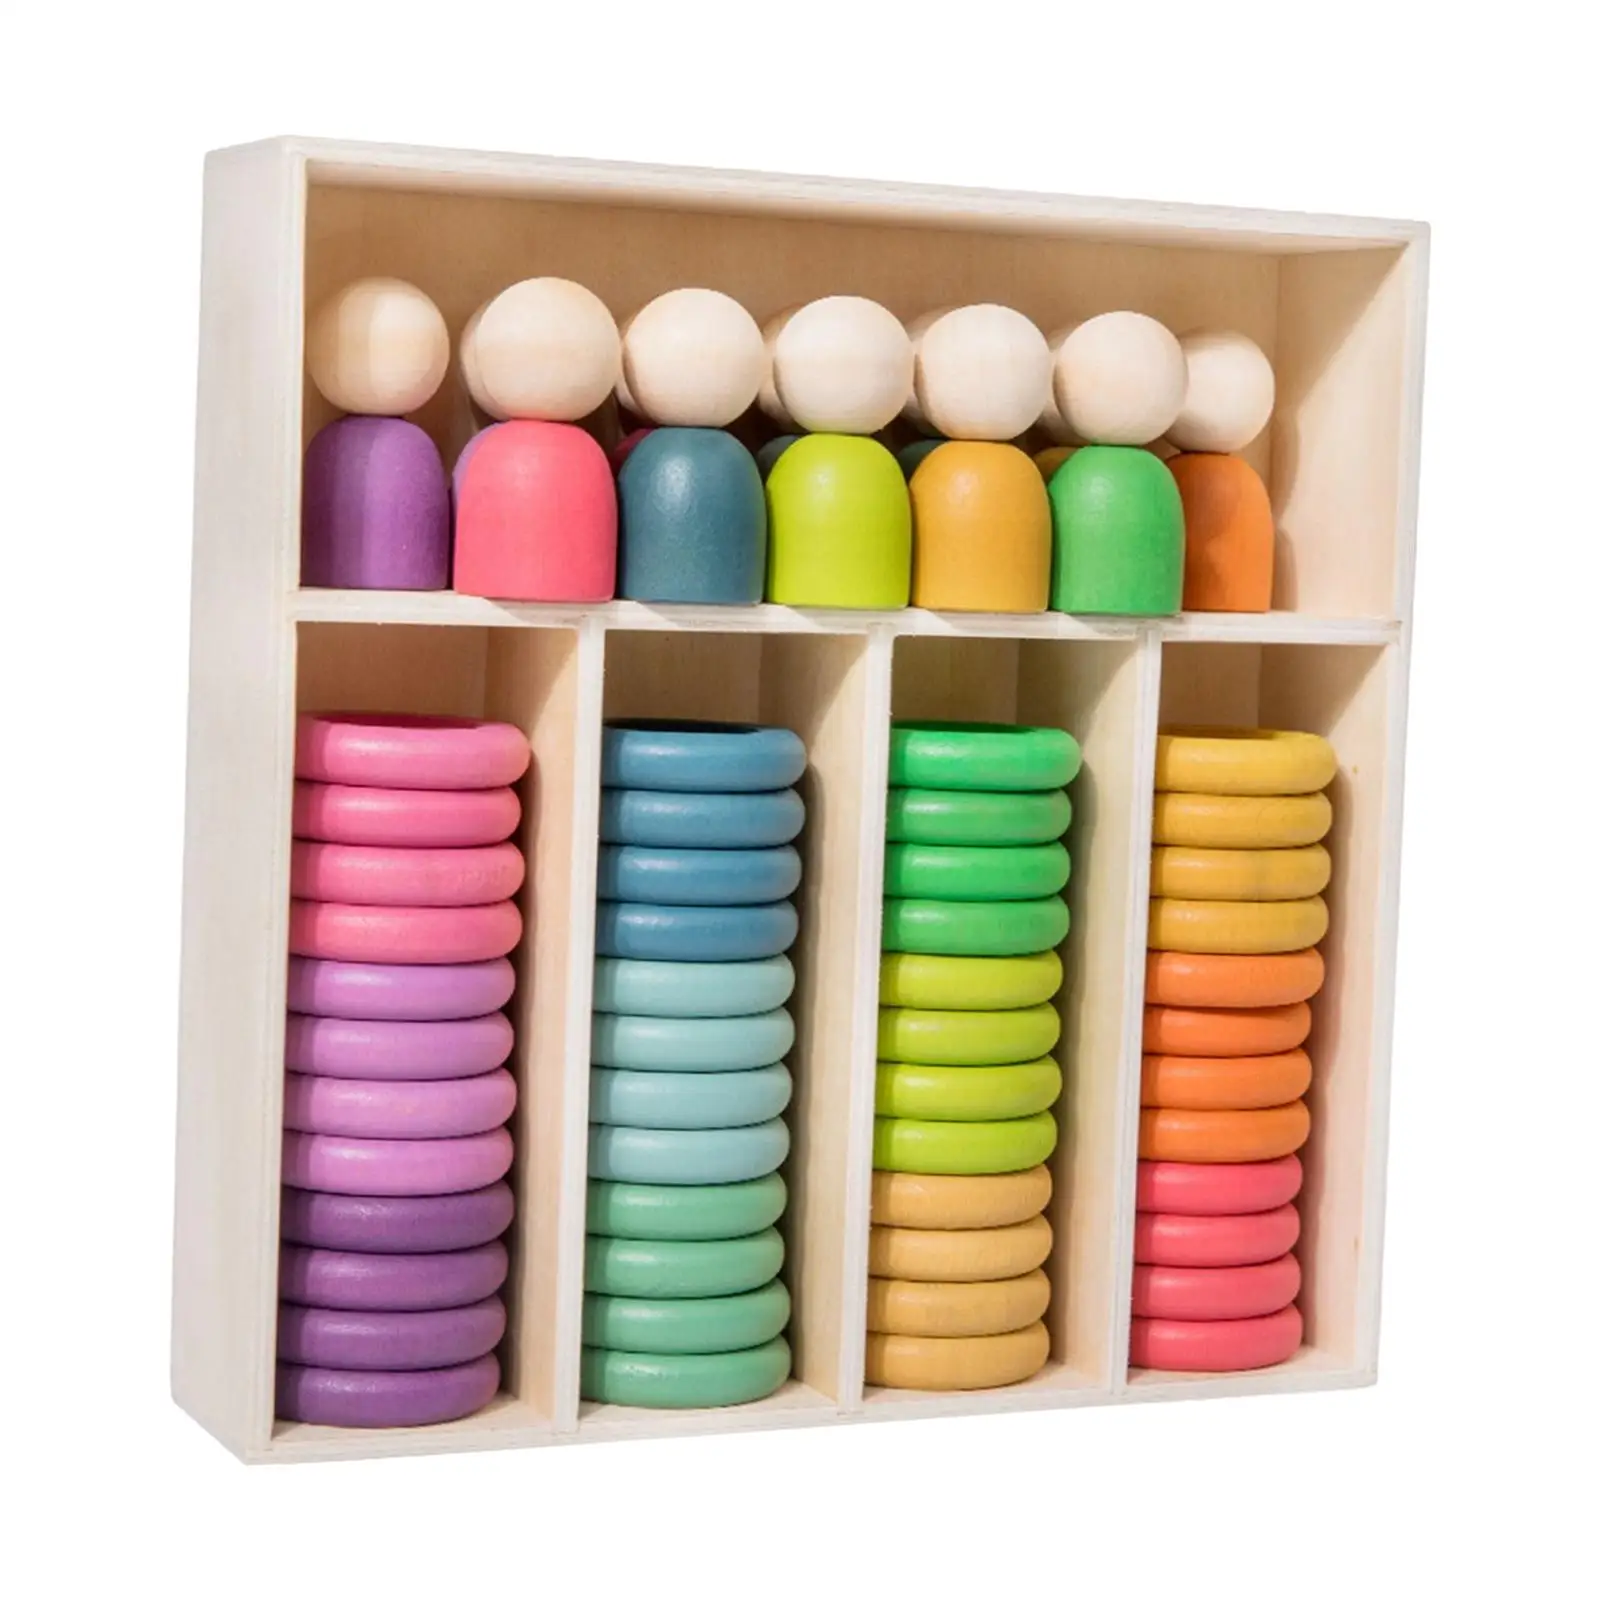 Wooden Rainbow Stacking Sorting Toys Montessori Toys Stacking and Building Toy for Kids Preschool Toy Learning Activity